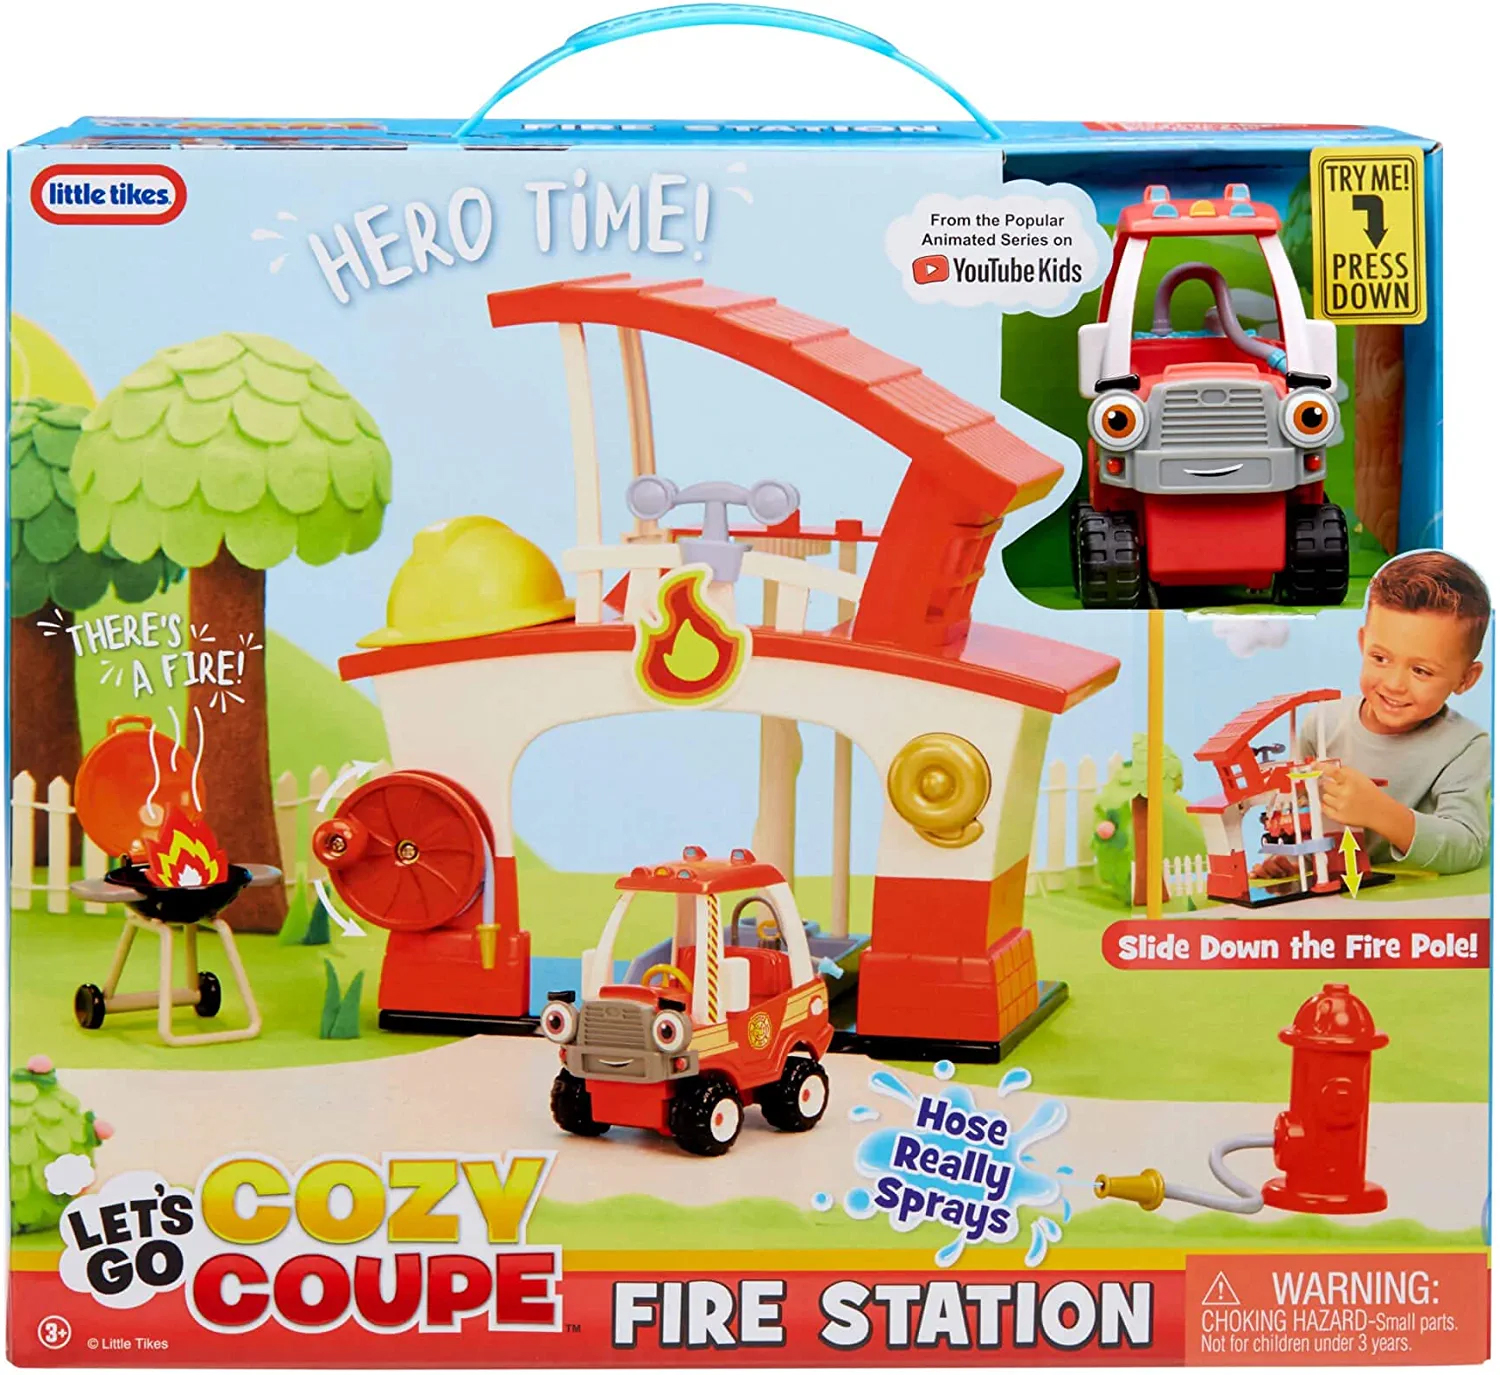 Let's Go Cozy Coupe Fire Station